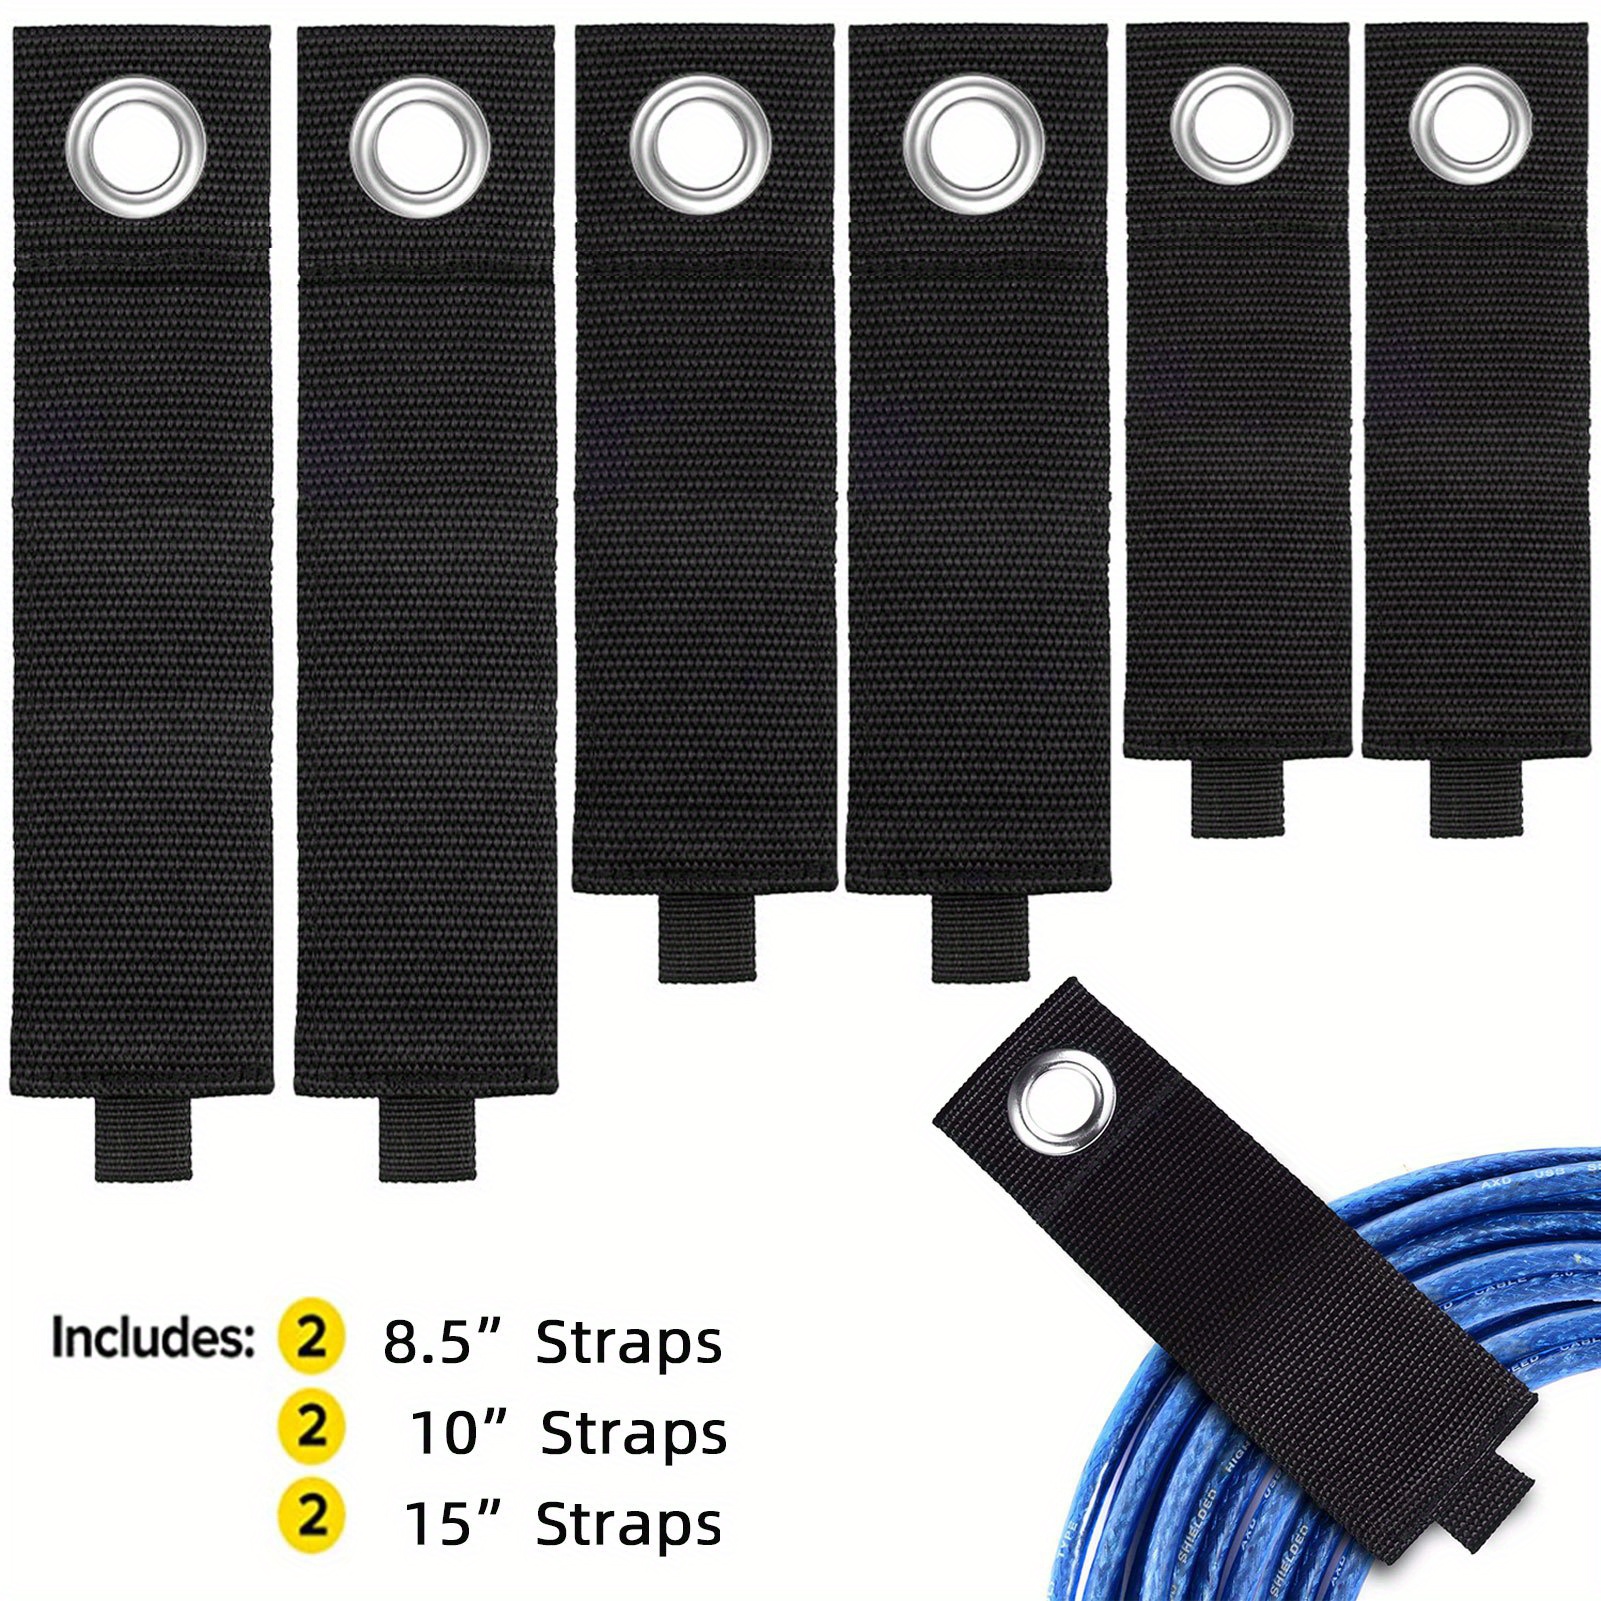 Wrap-It Heavy-Duty Straps and Extension Cord Organizers 10-in